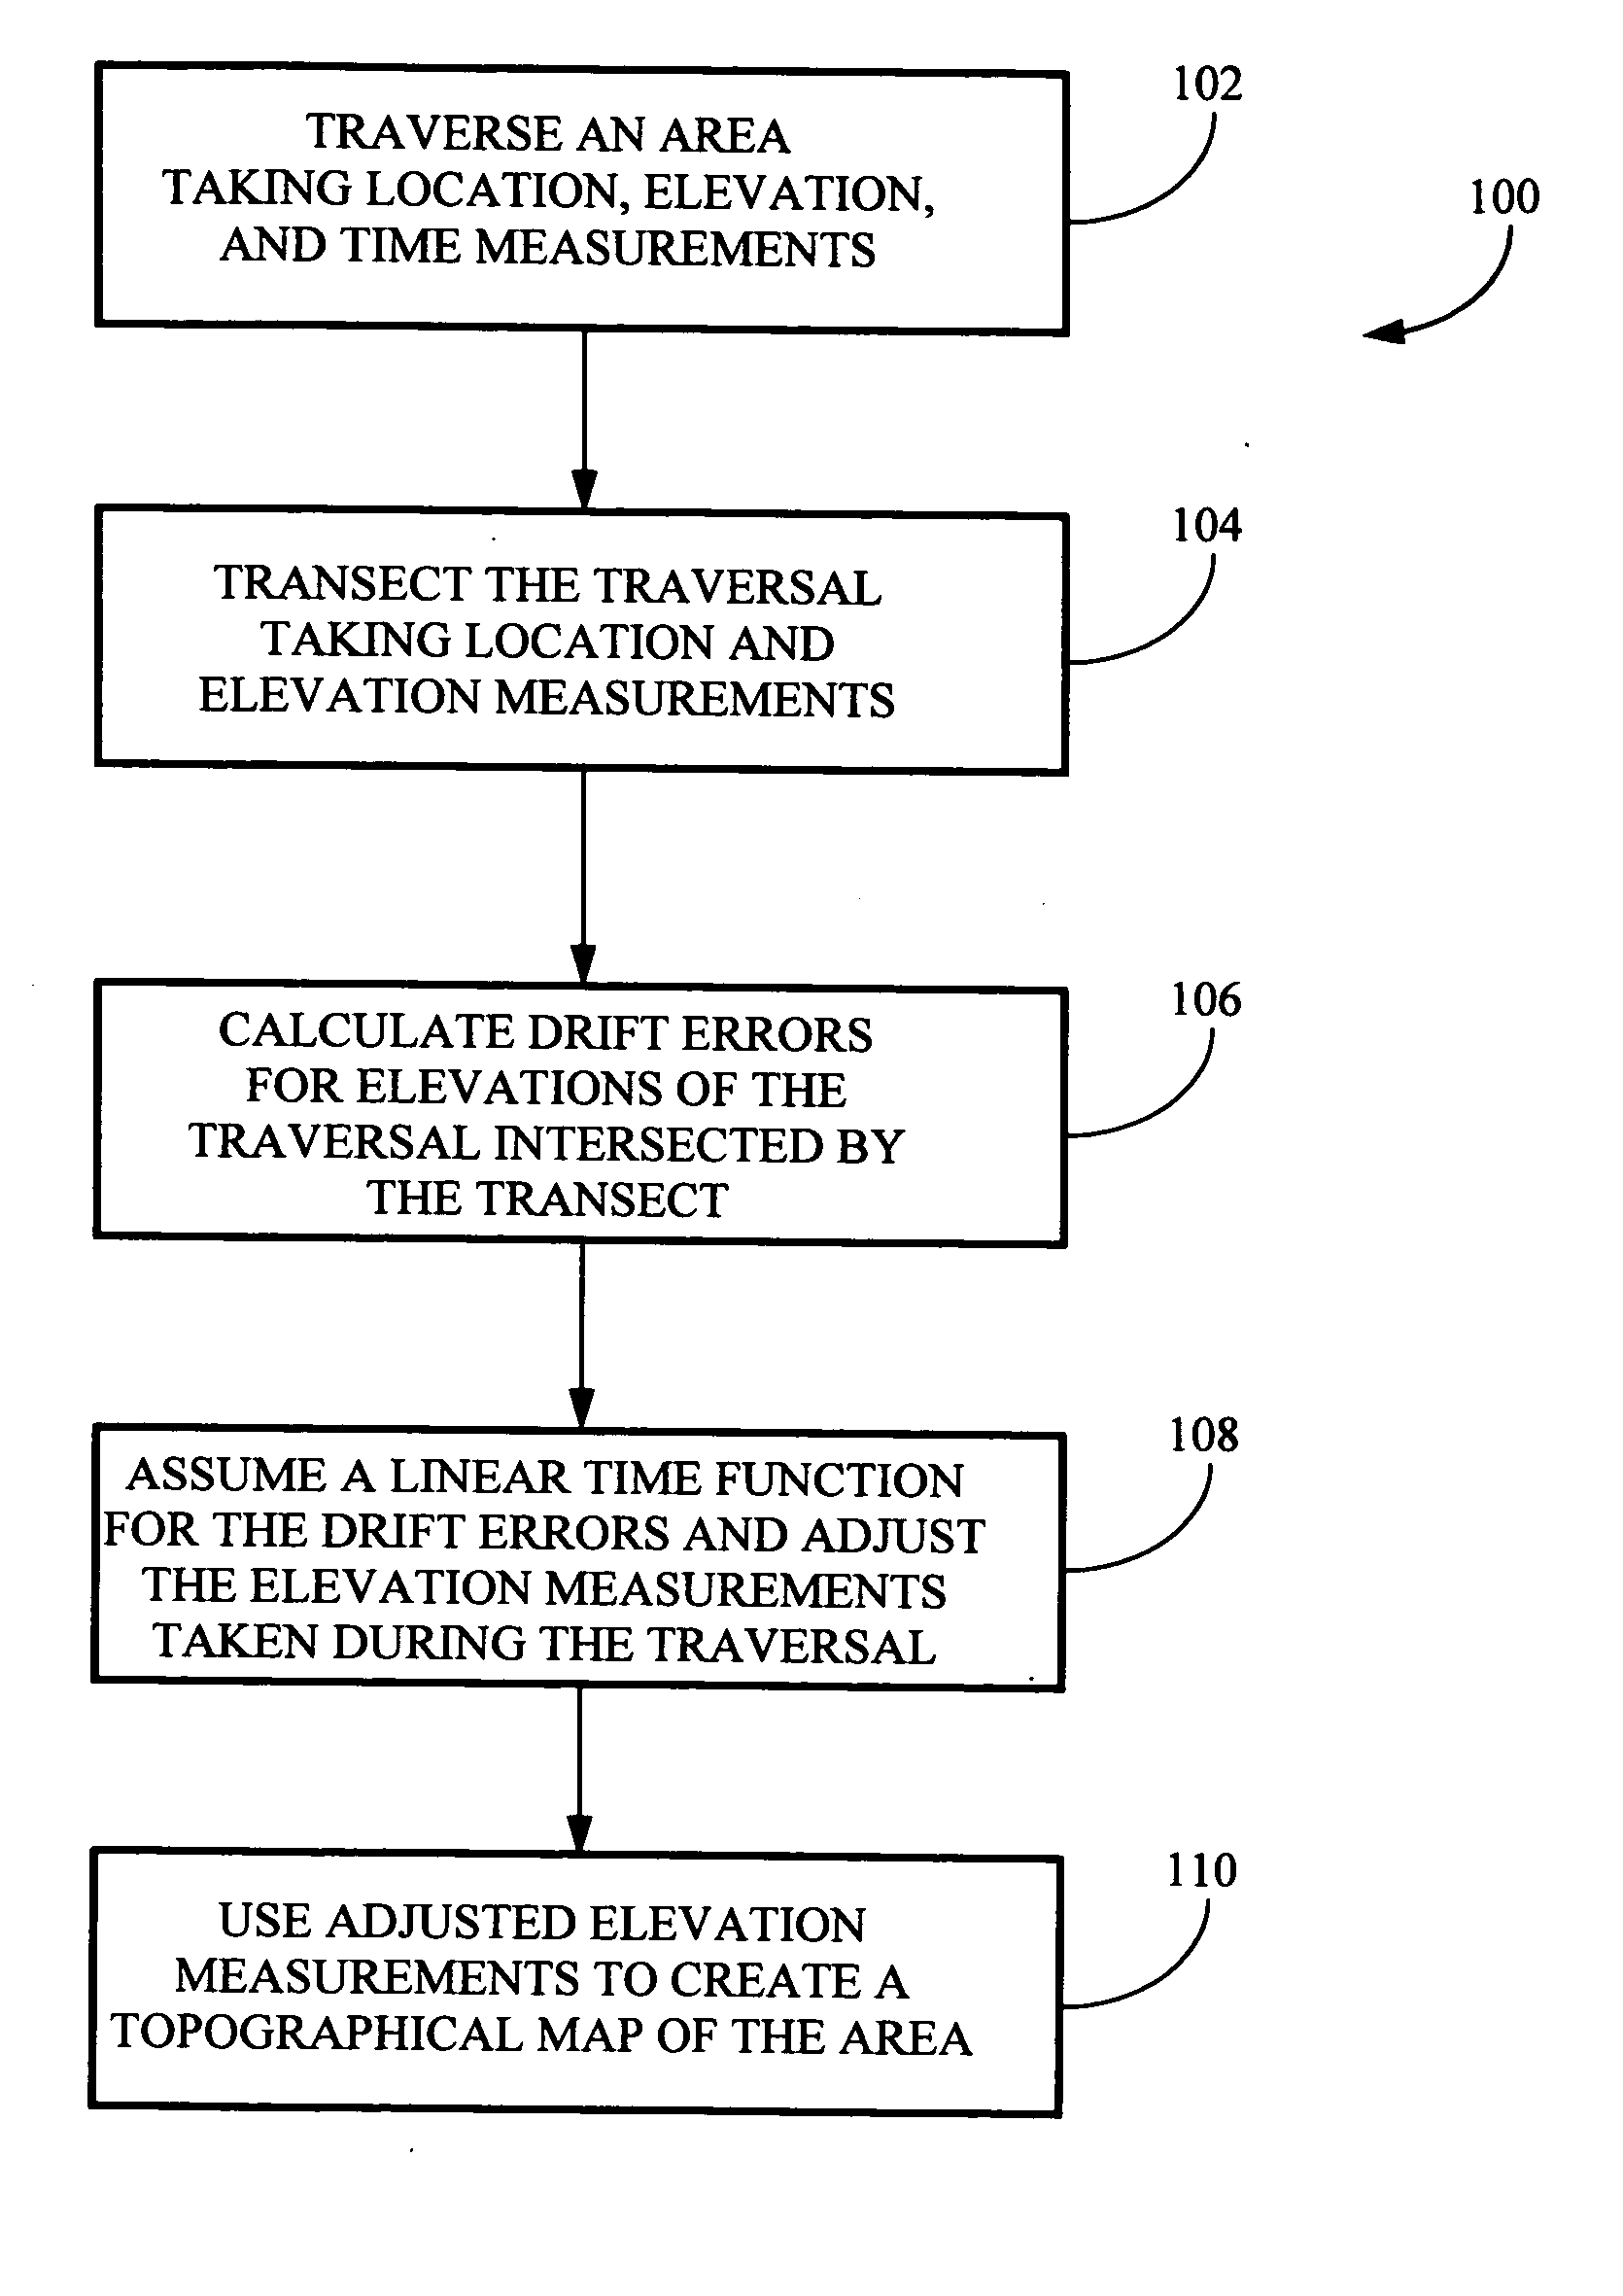 System and method for creating accurate topographical maps using low-drift DGPS